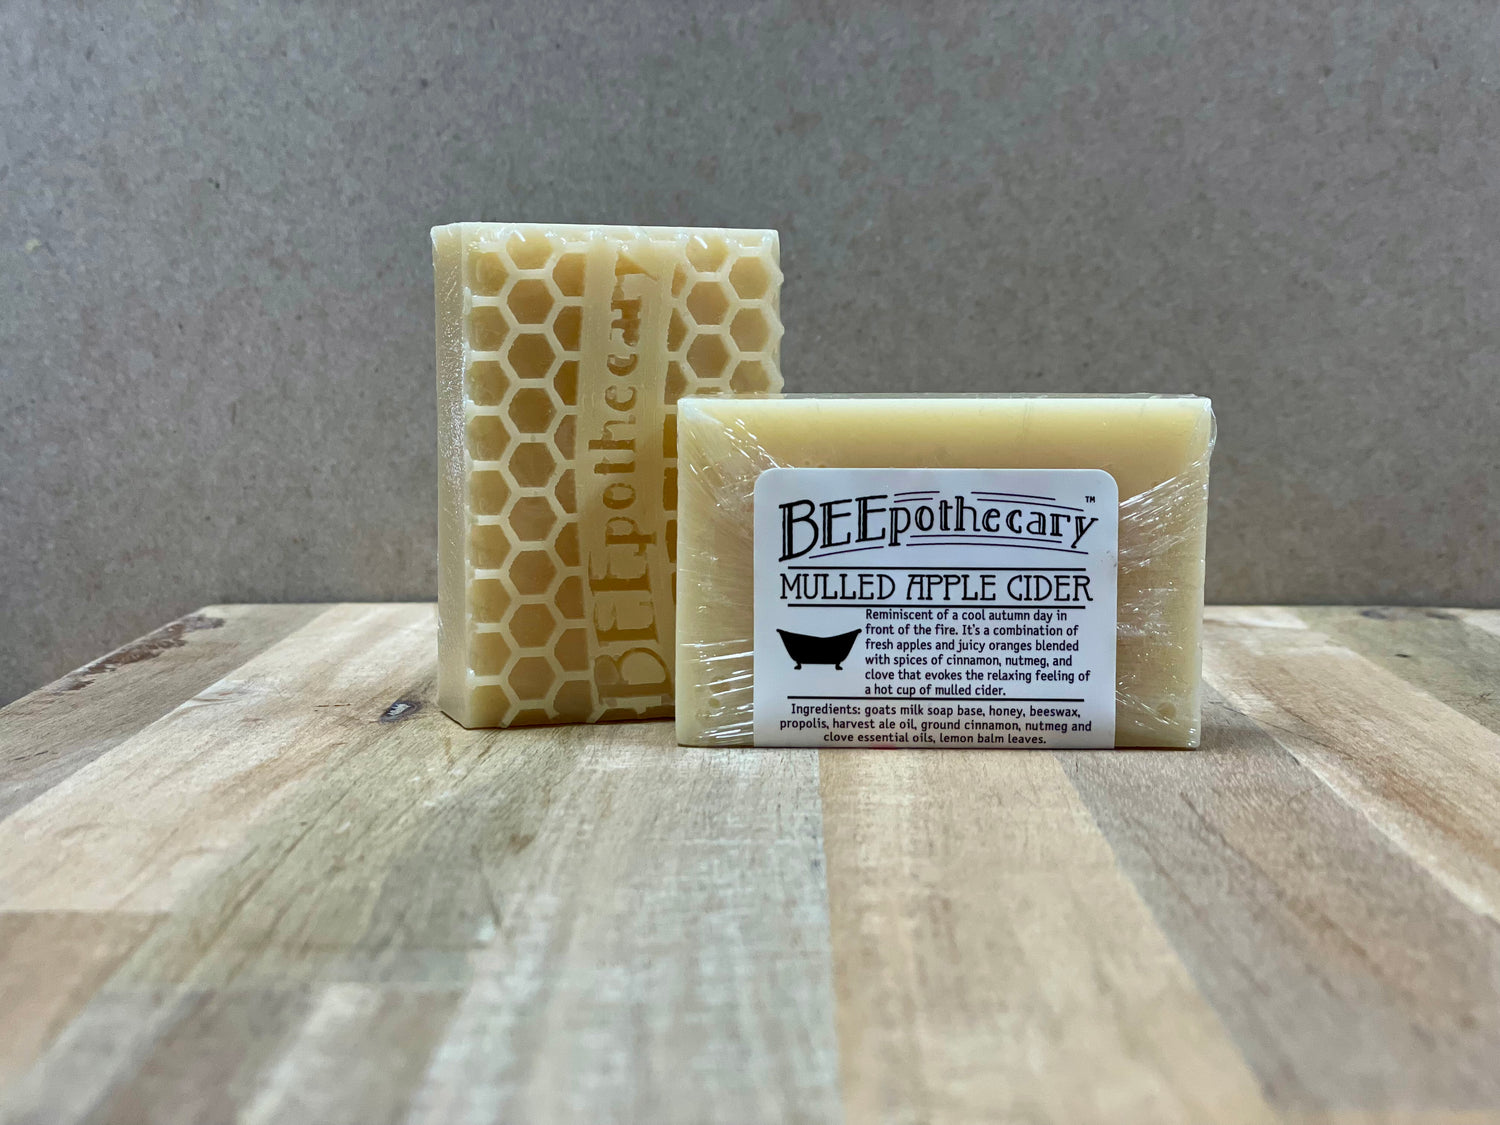 BEEpothecary Goat Milk Soap Mulled Apple Cider fragrance in packaging with white label